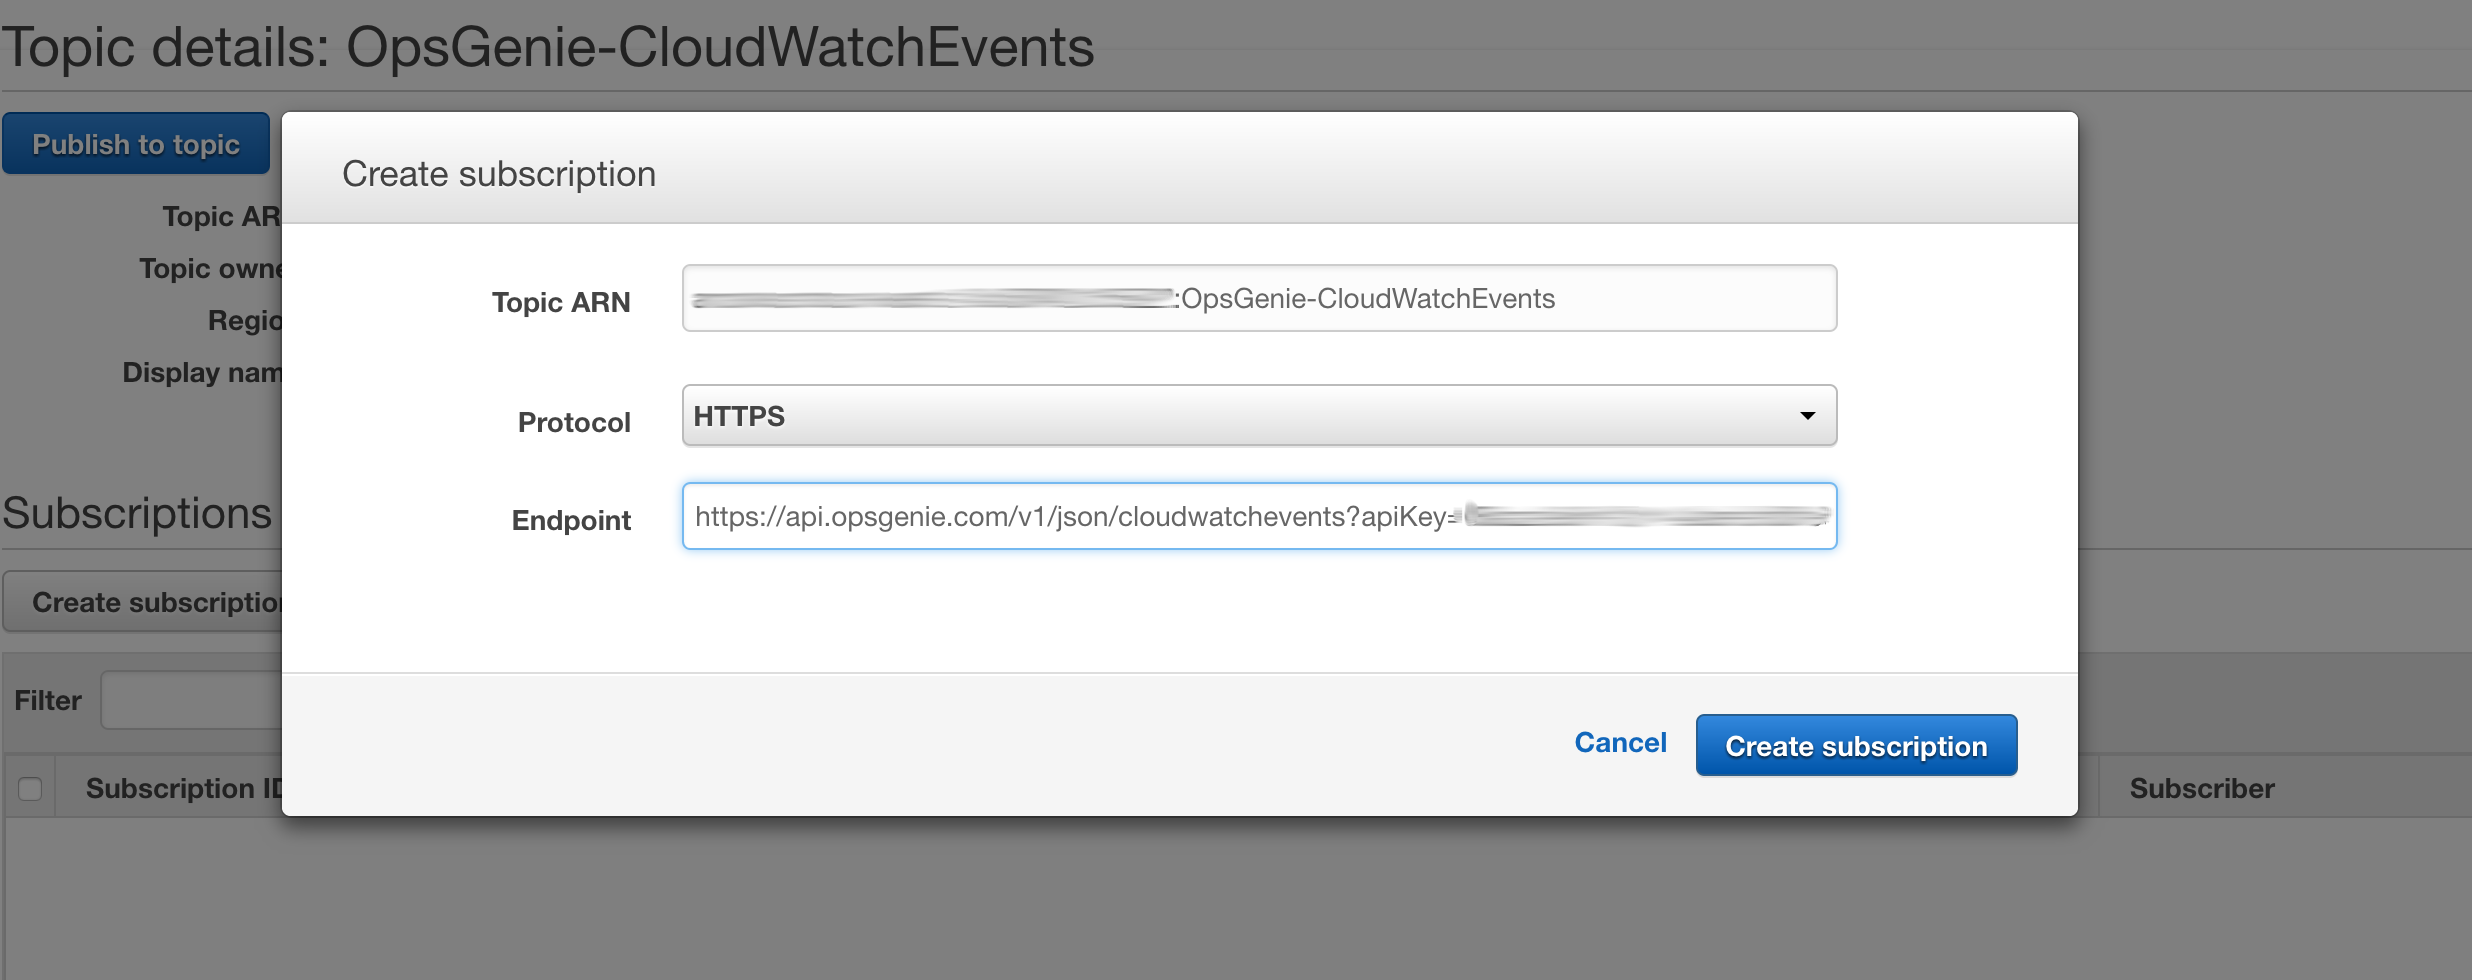 CloudWatch Events でサブスクリプションを作成する